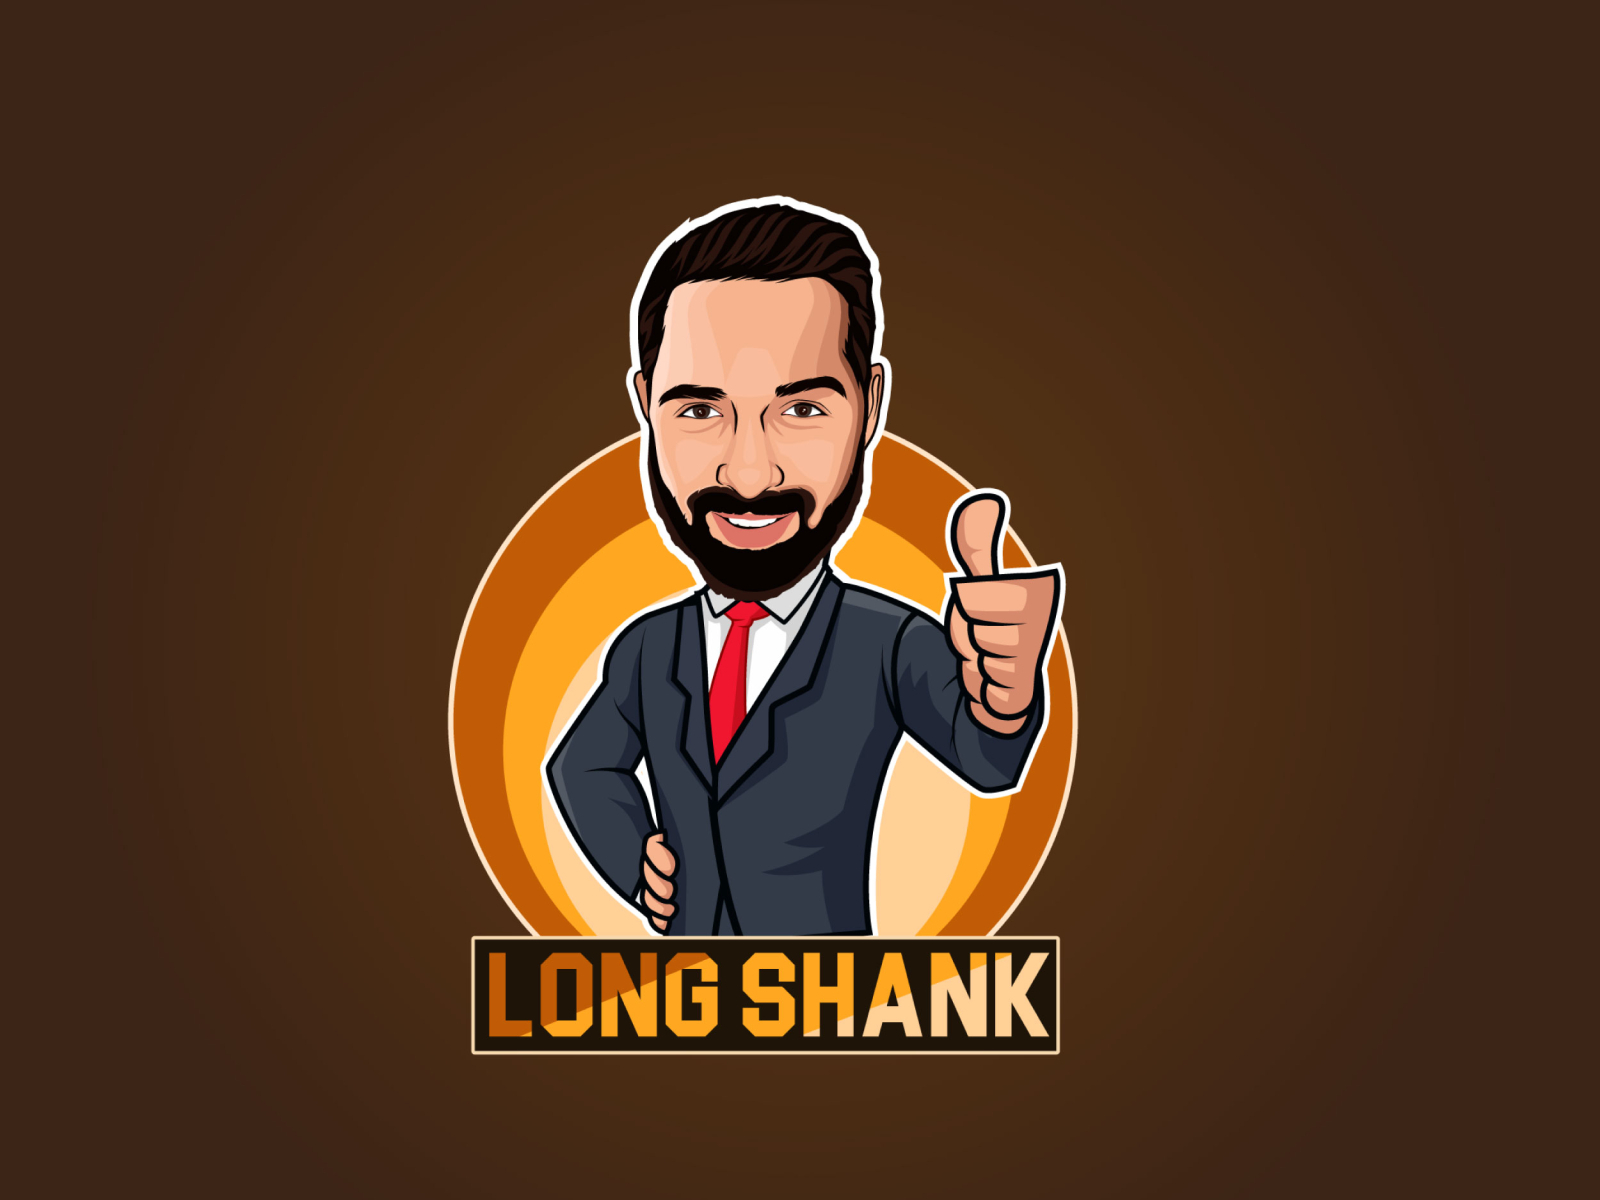 Business Man Character Cartoon Logo by Sadhon Biswas on Dribbble